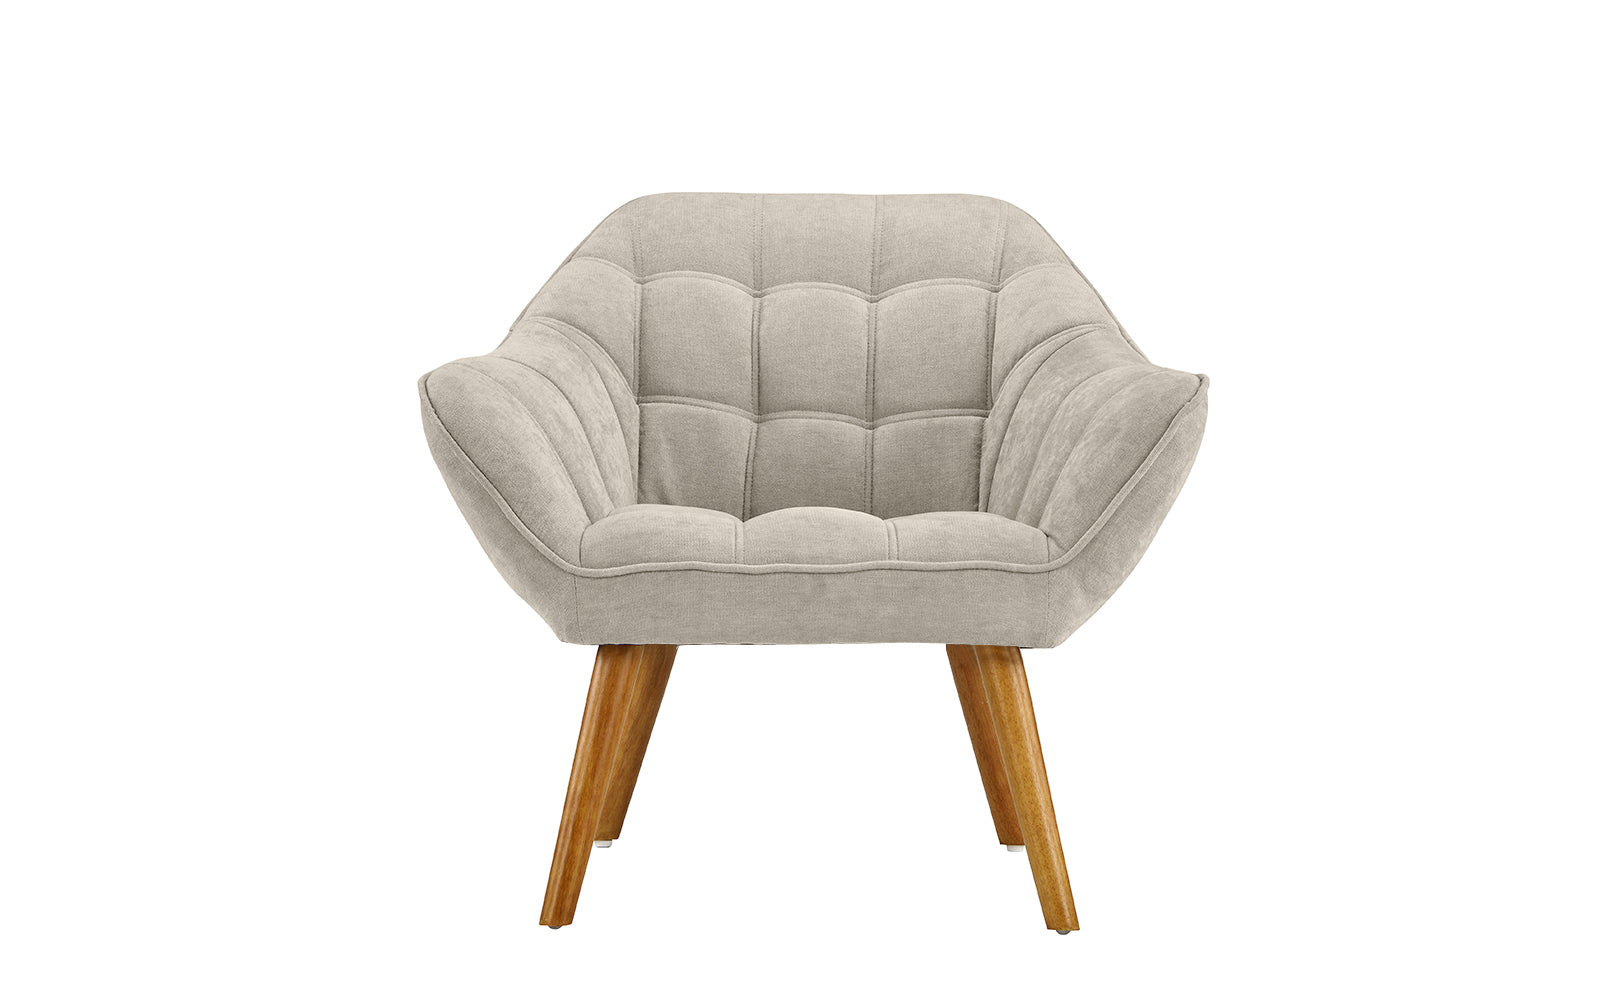 Ayla Mid Century Tufted Linen Shell Accent Chair